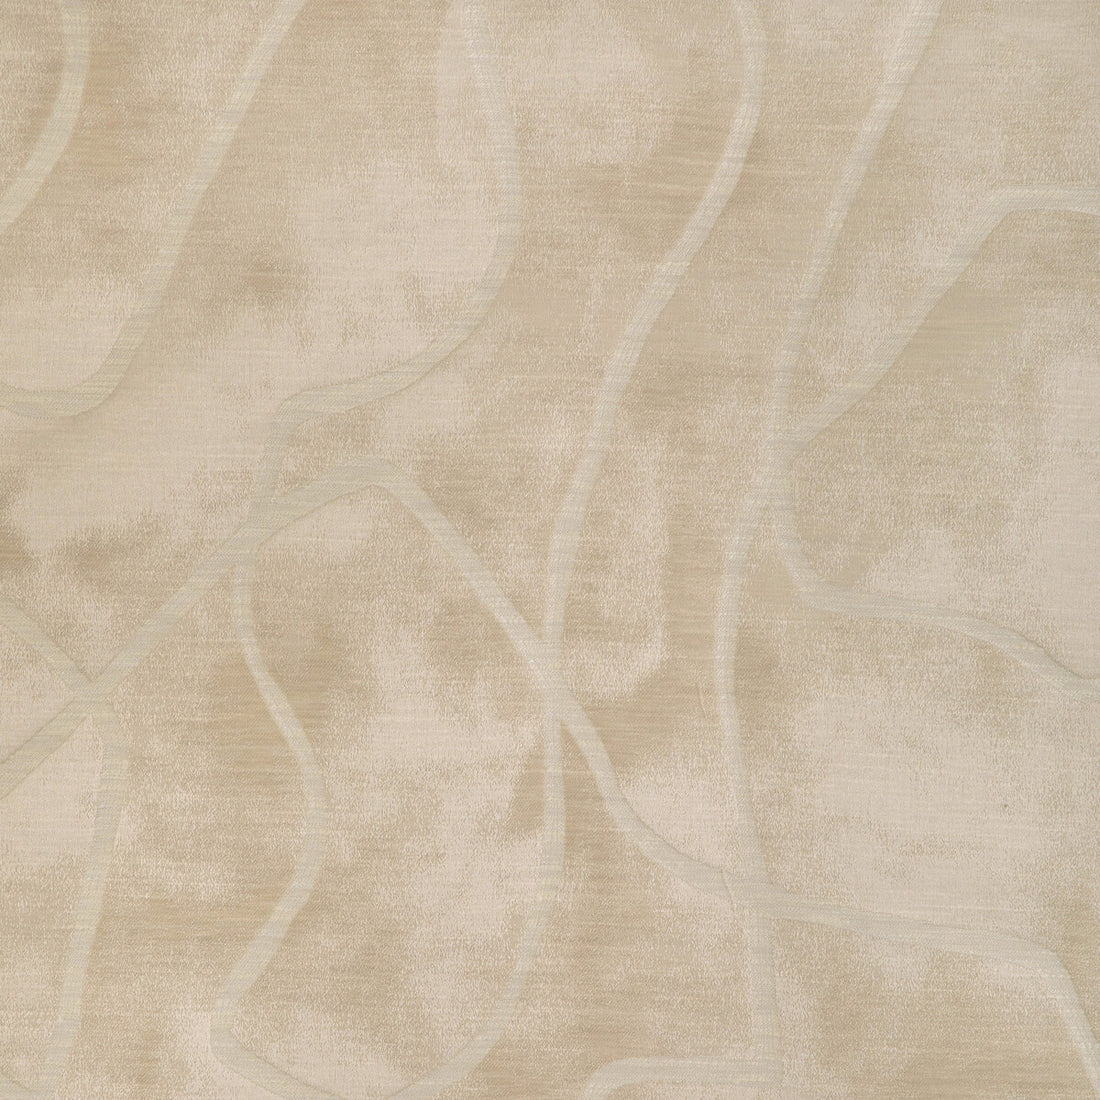 Poetic Motion fabric in beach color - pattern 36808.16.0 - by Kravet Design in the Candice Olson collection